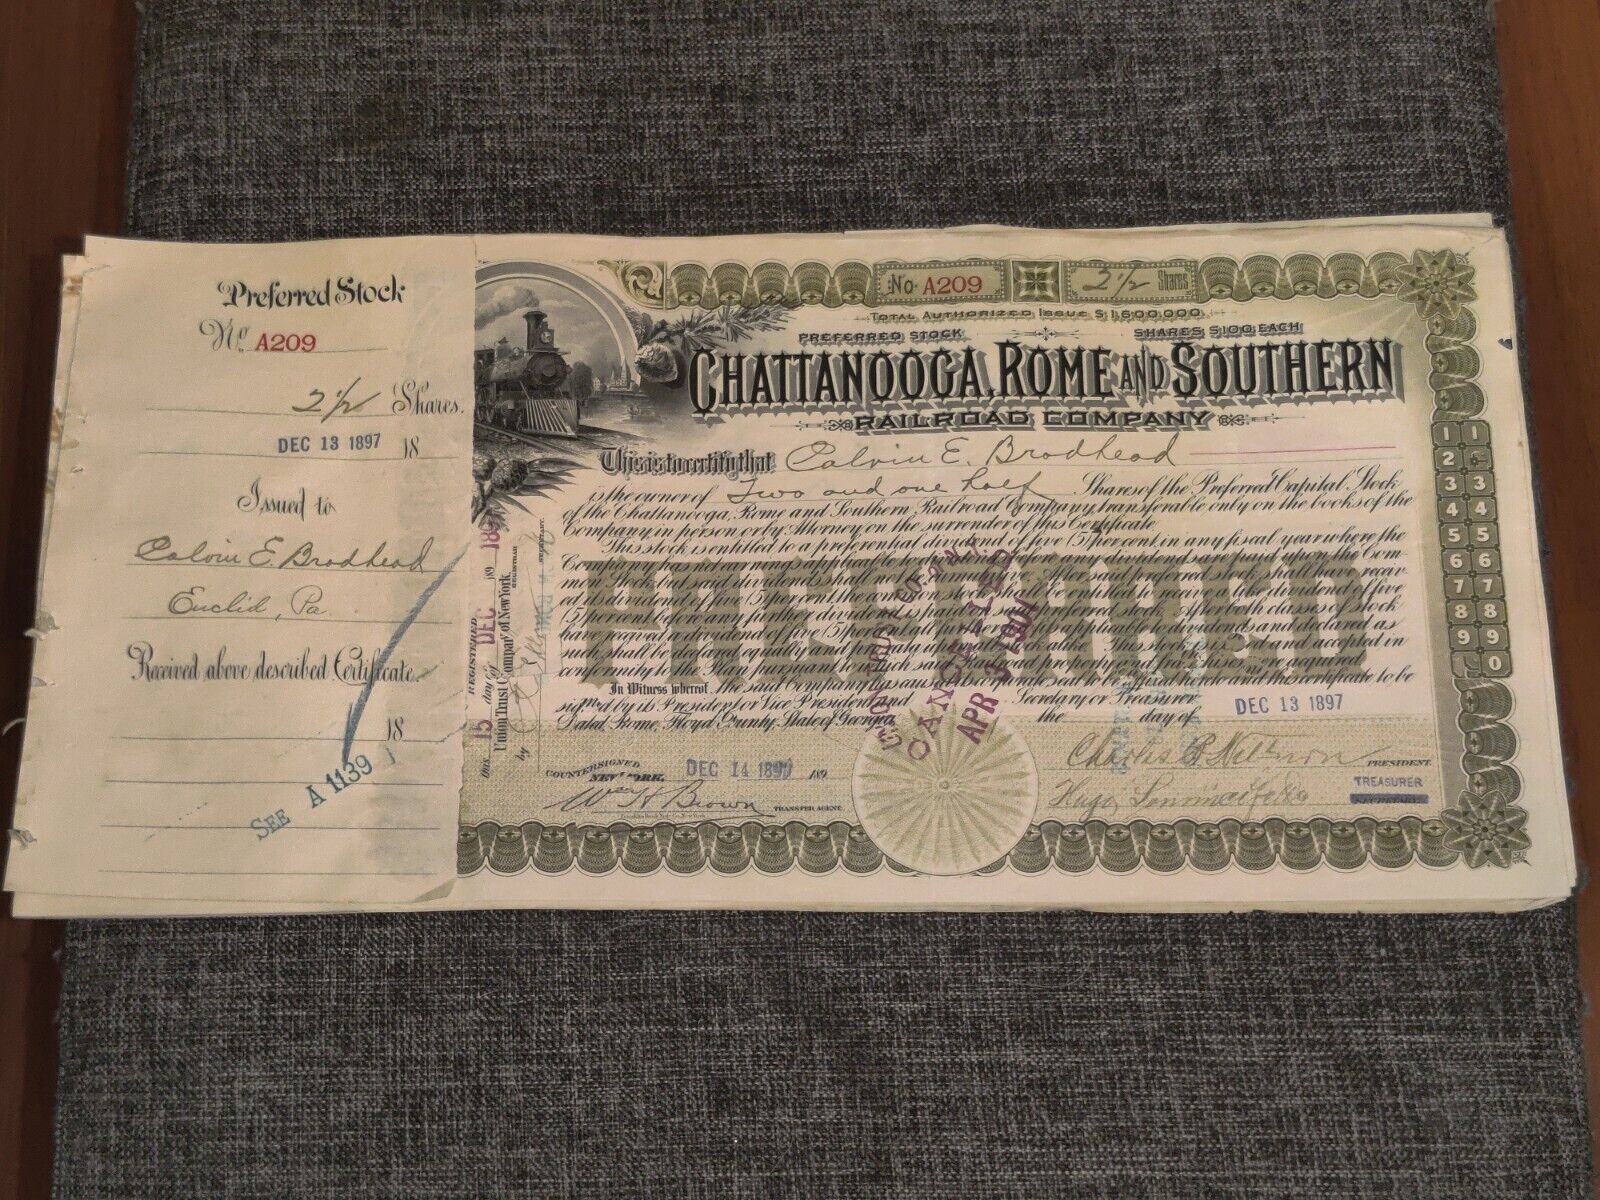 RARE Chattanooga Rome & Southern Railroad Co. Stock Certificate Issued 1897